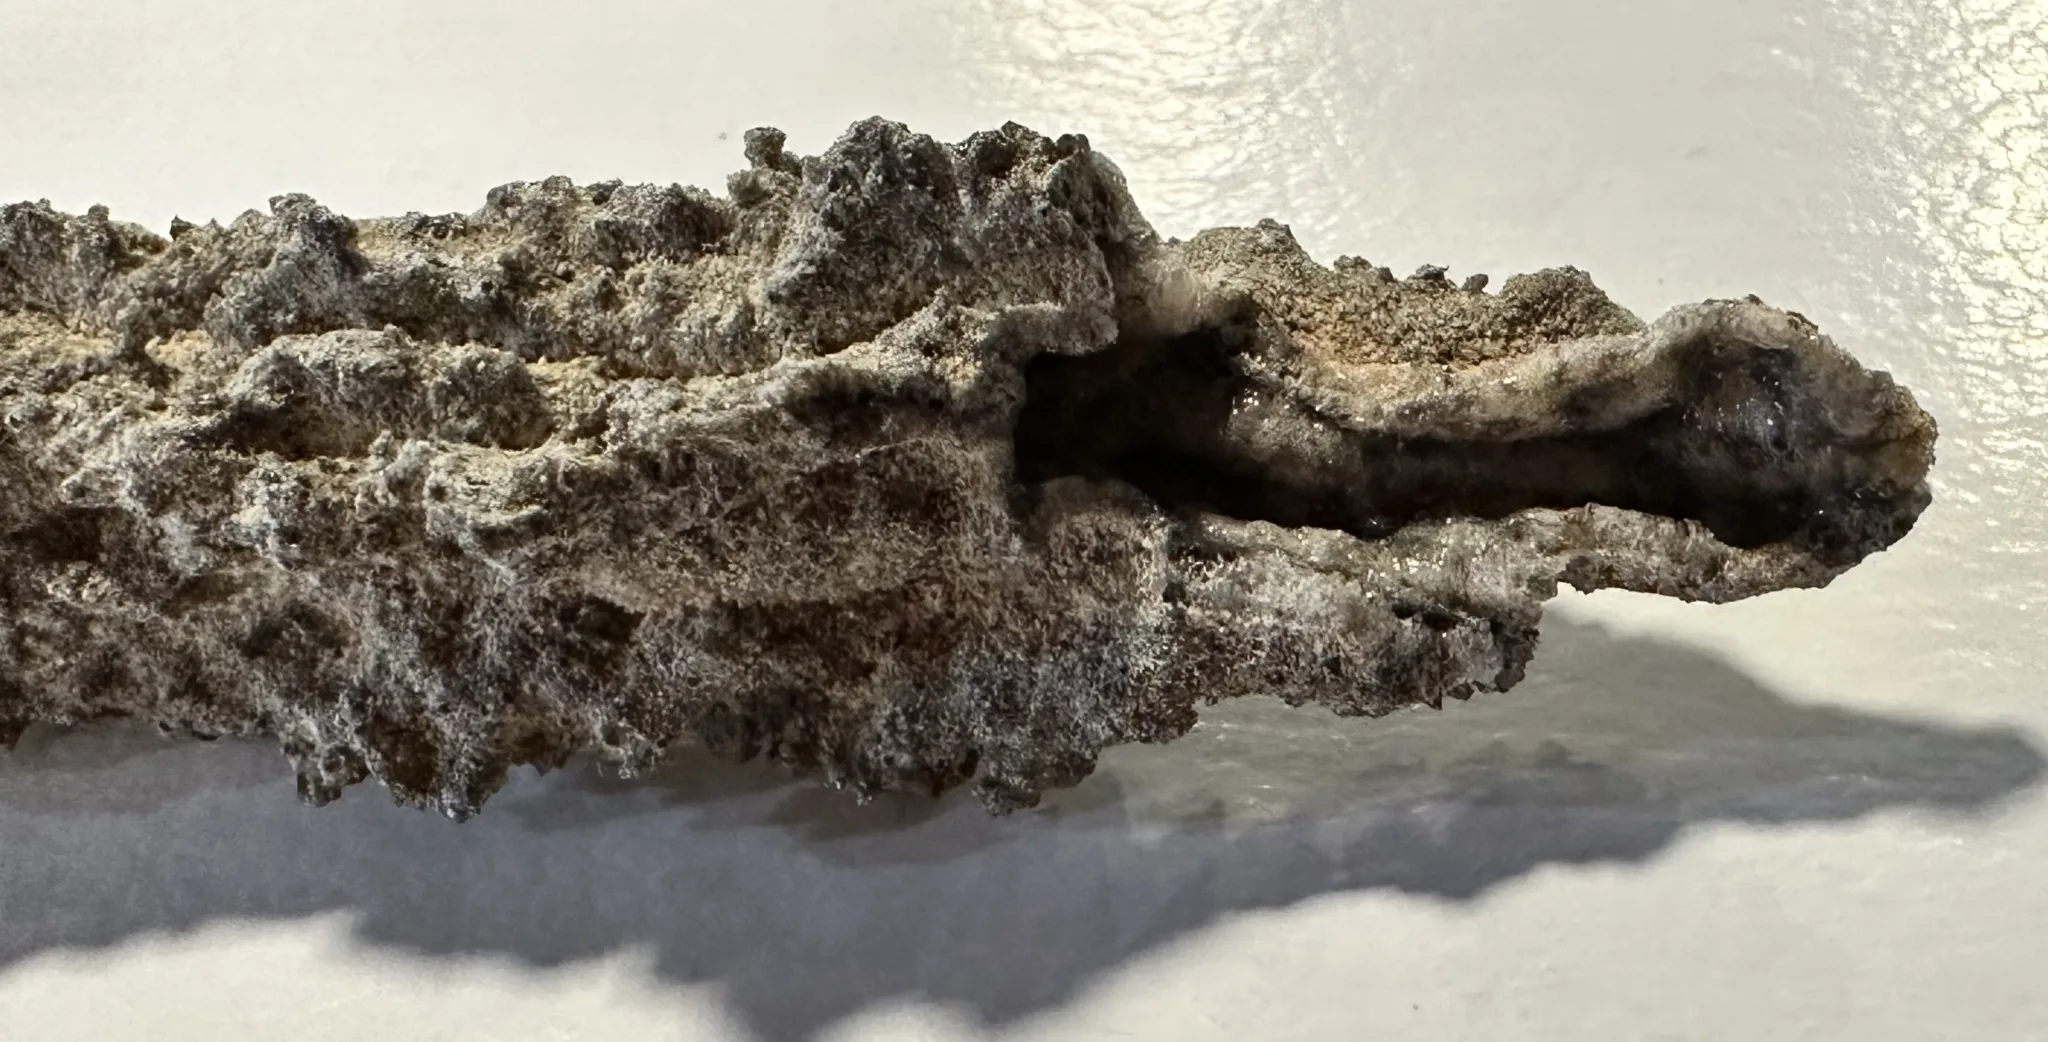 algerian fulgurite end view showing the opening